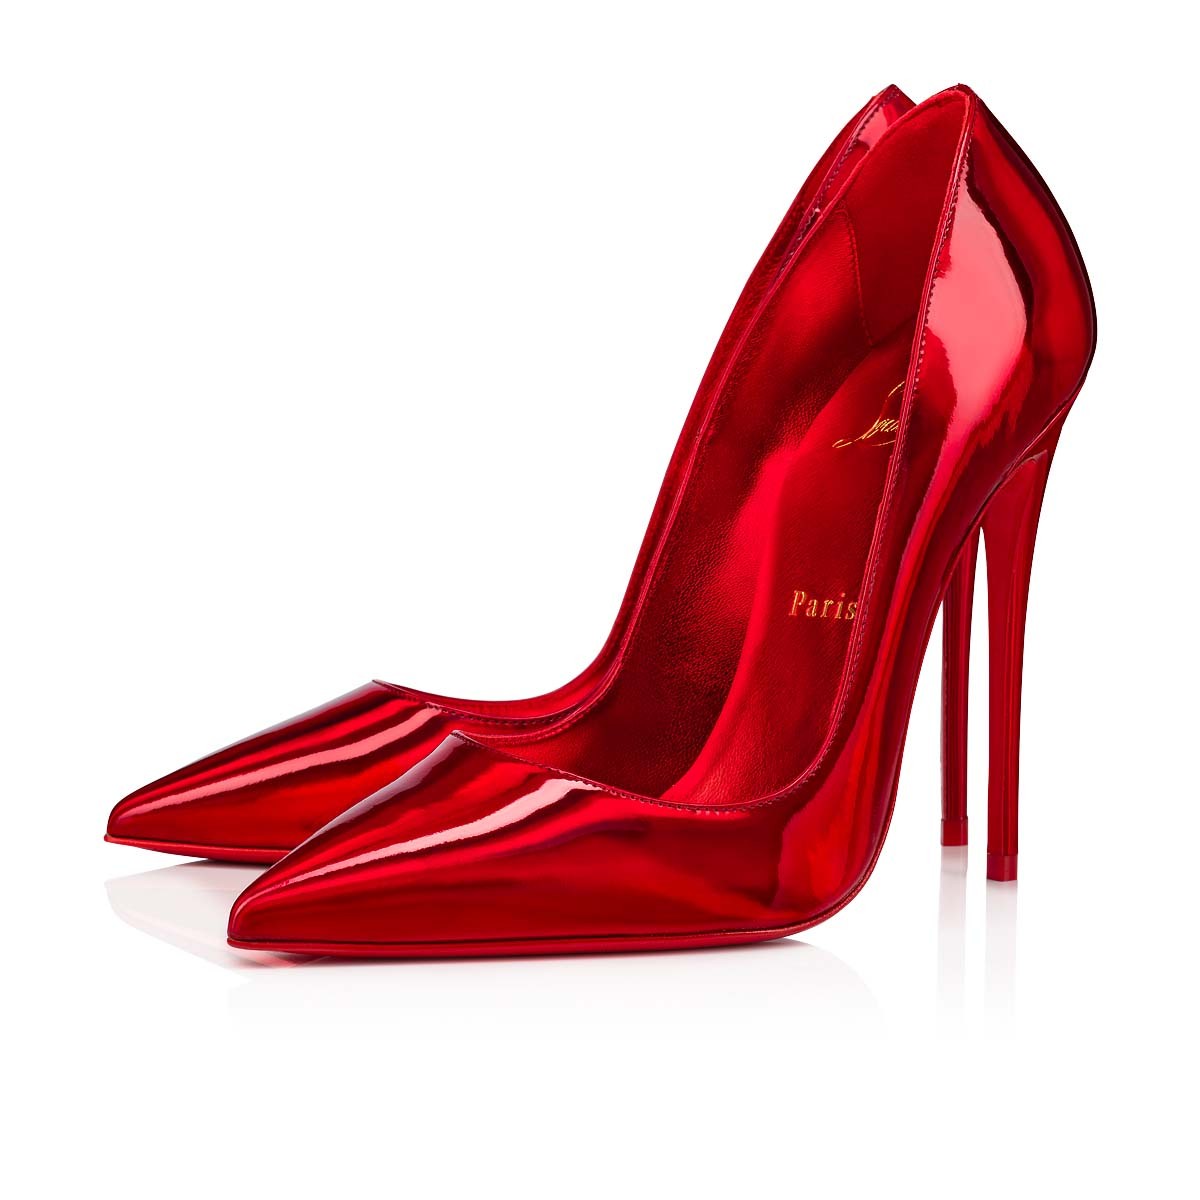 So Kate 65 mm Pumps Loubi Patent Calf Psychic Red